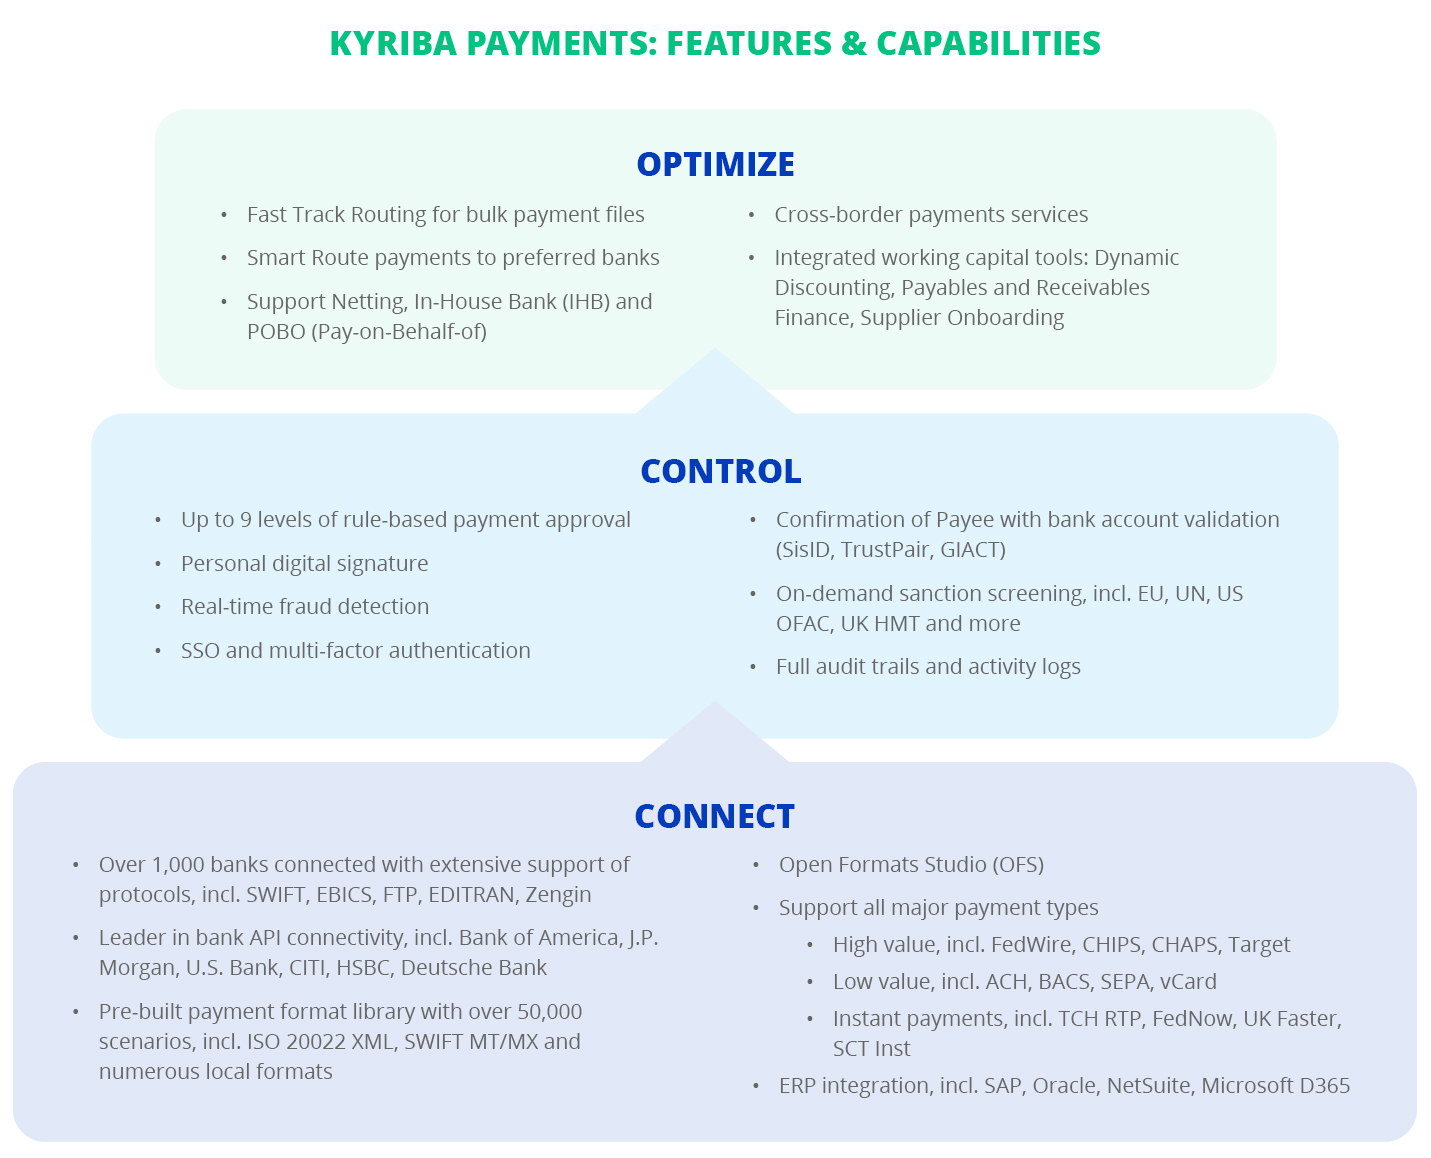 Kyriba Payments: Features & Capabilities